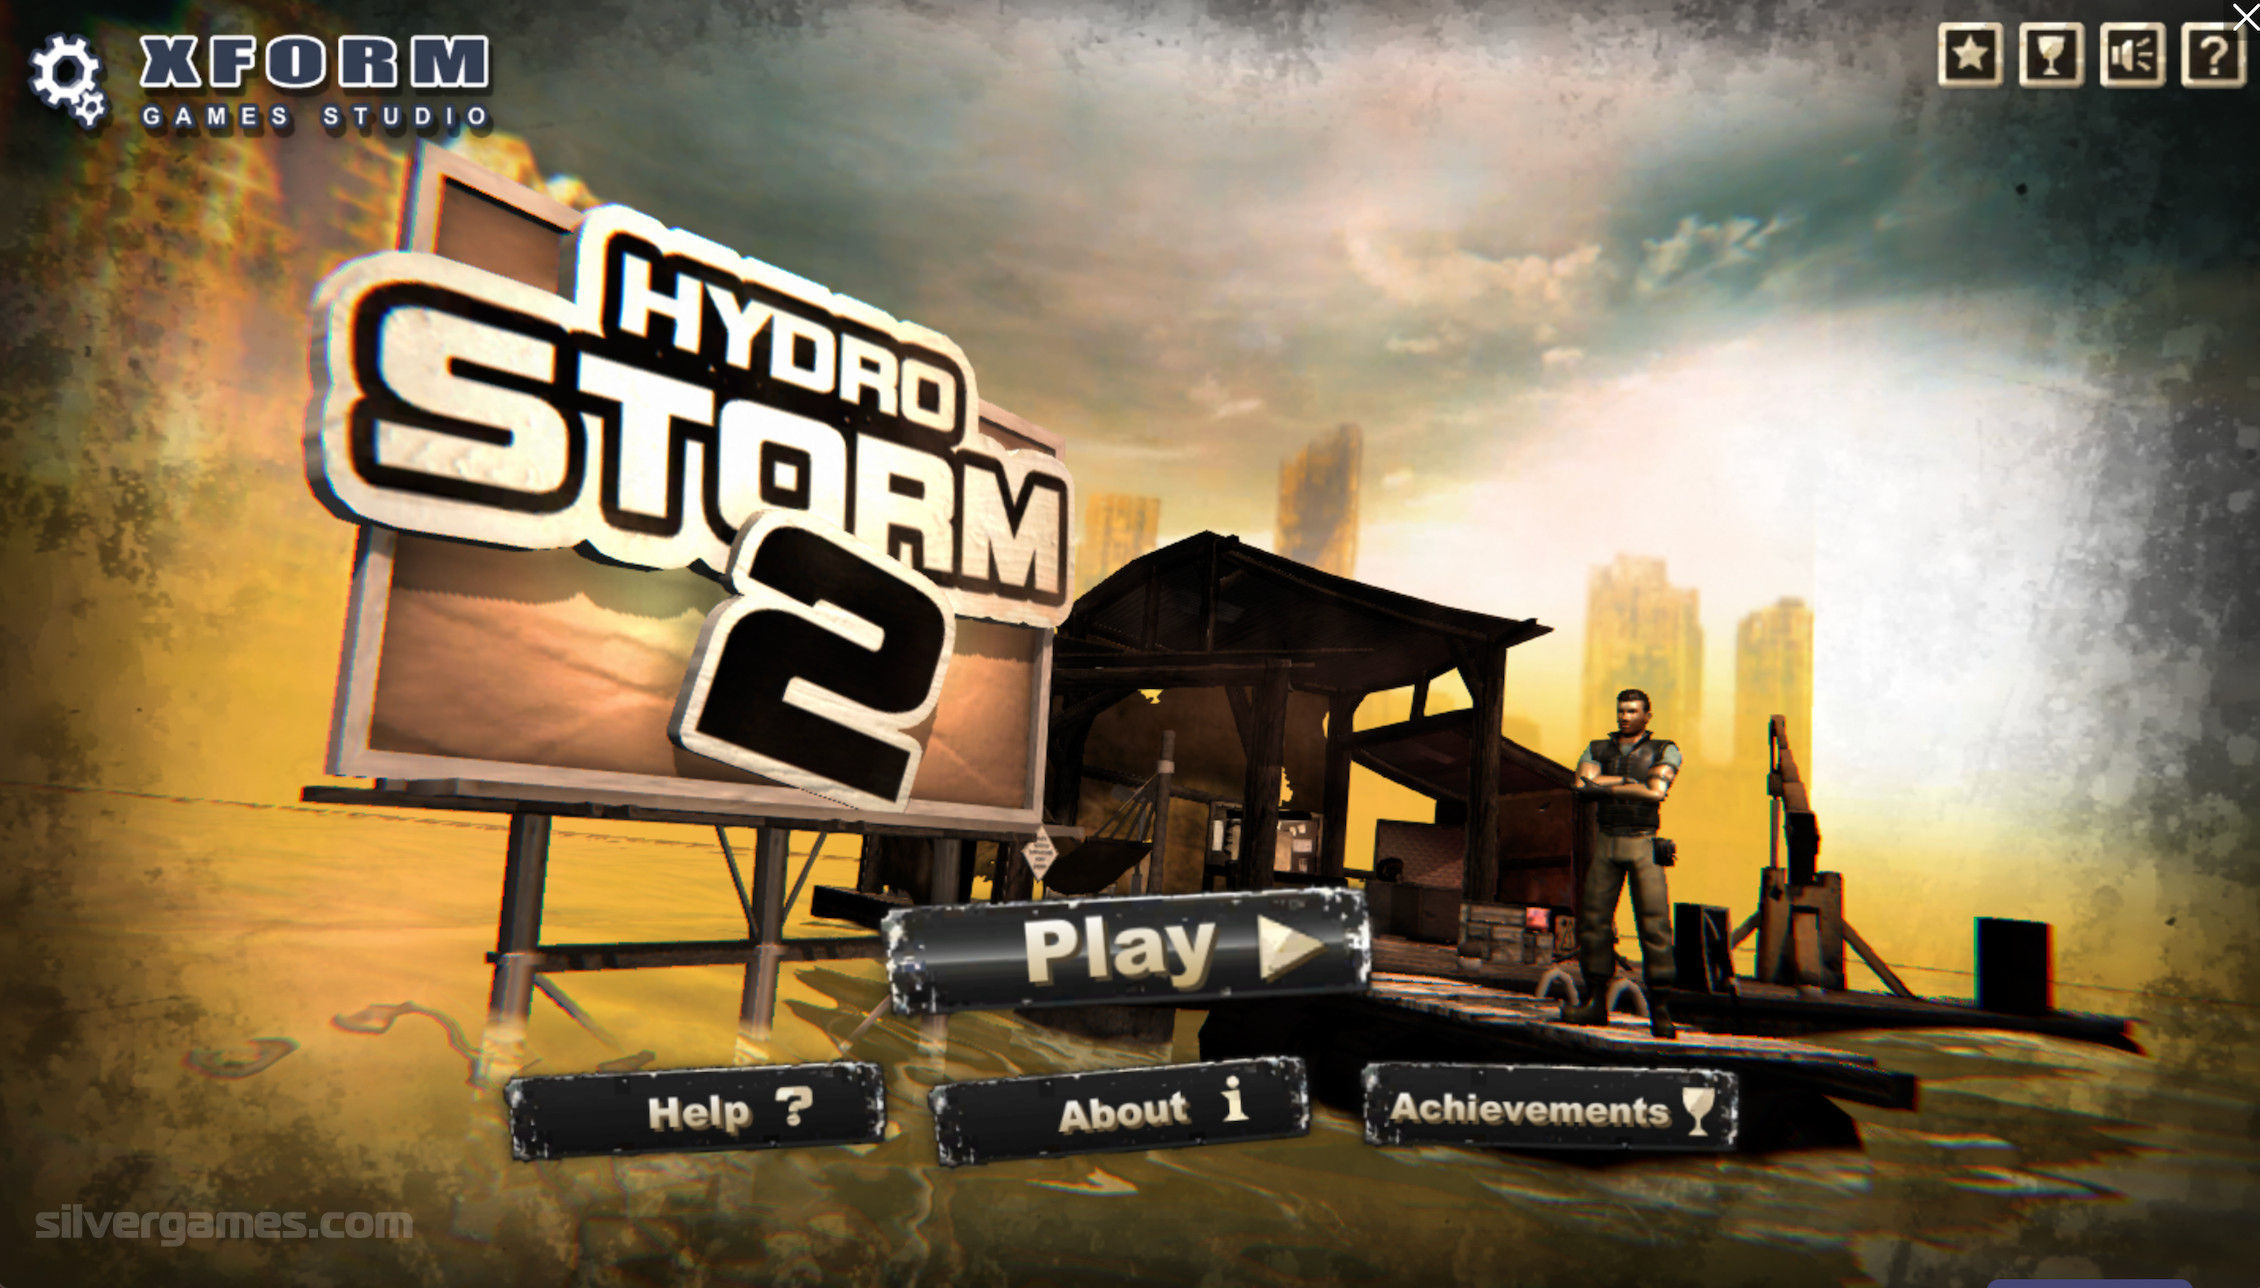 HYDRO STORM 2 - Play Online for Free!